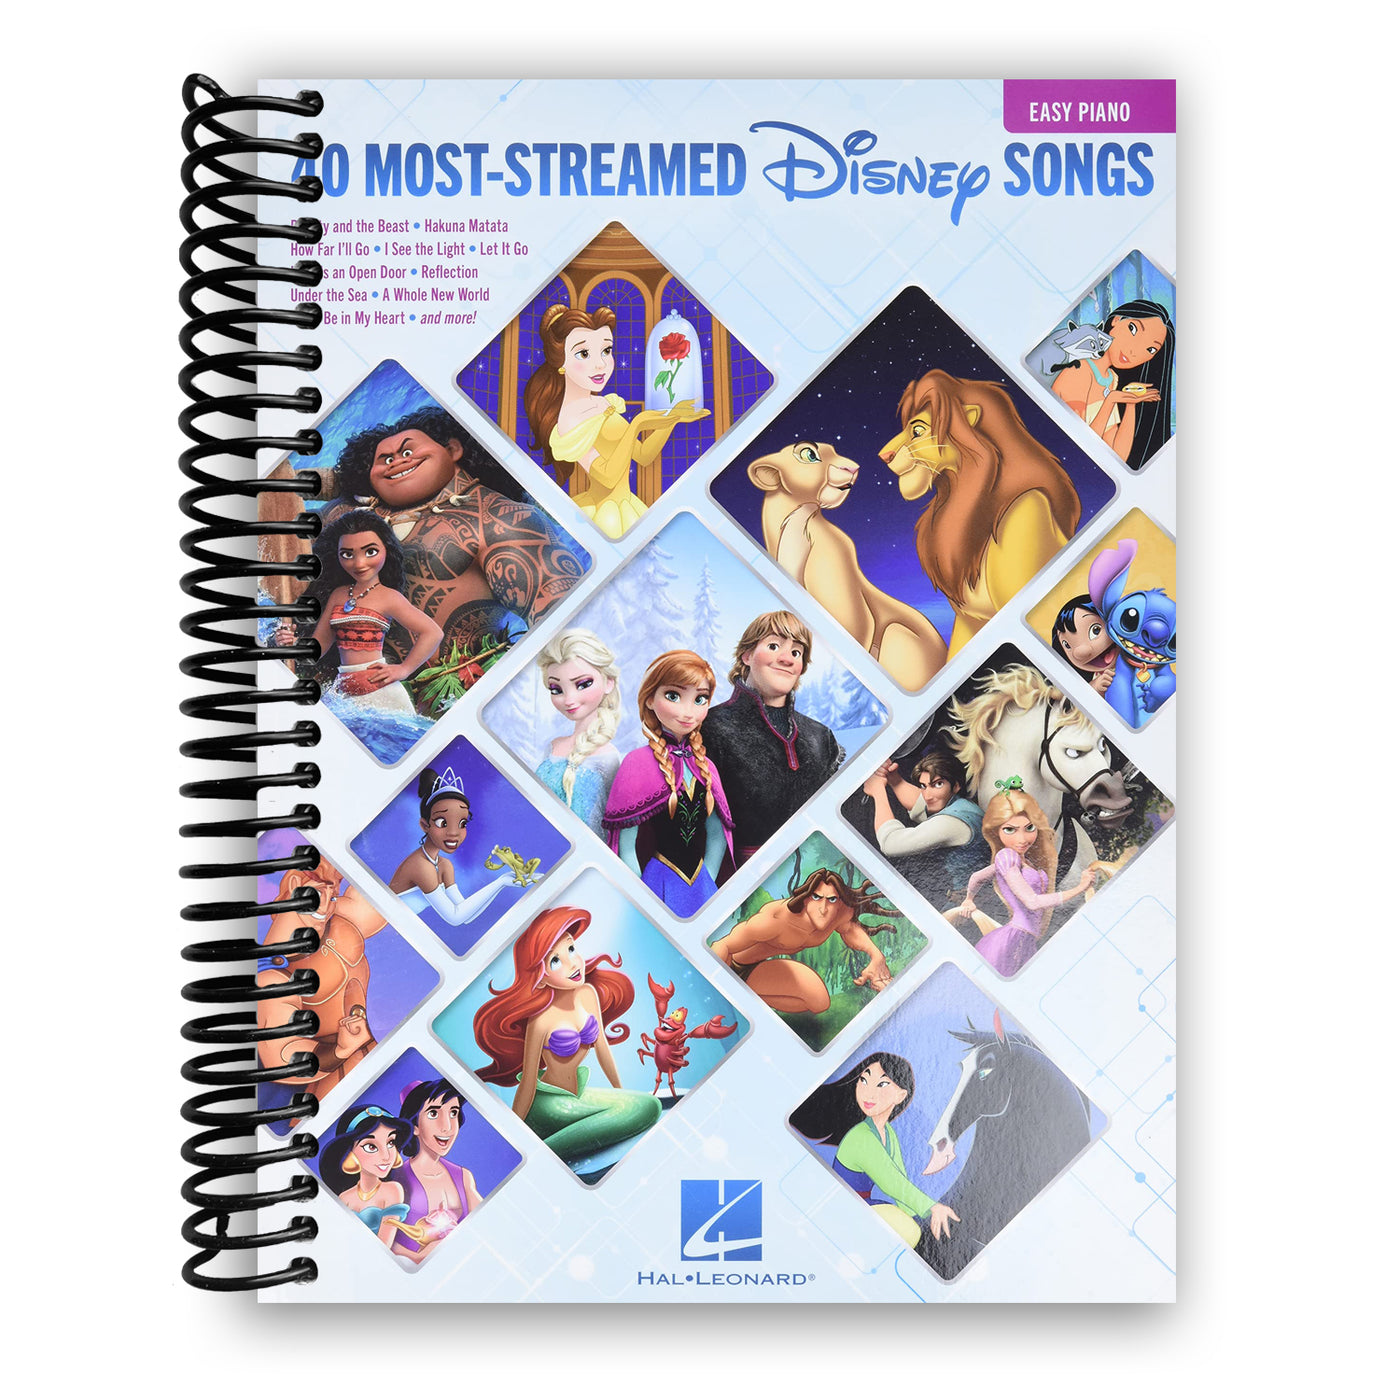 The 40 Most-Streamed Disney Songs: Easy Piano Songbook (Spiral Bound)